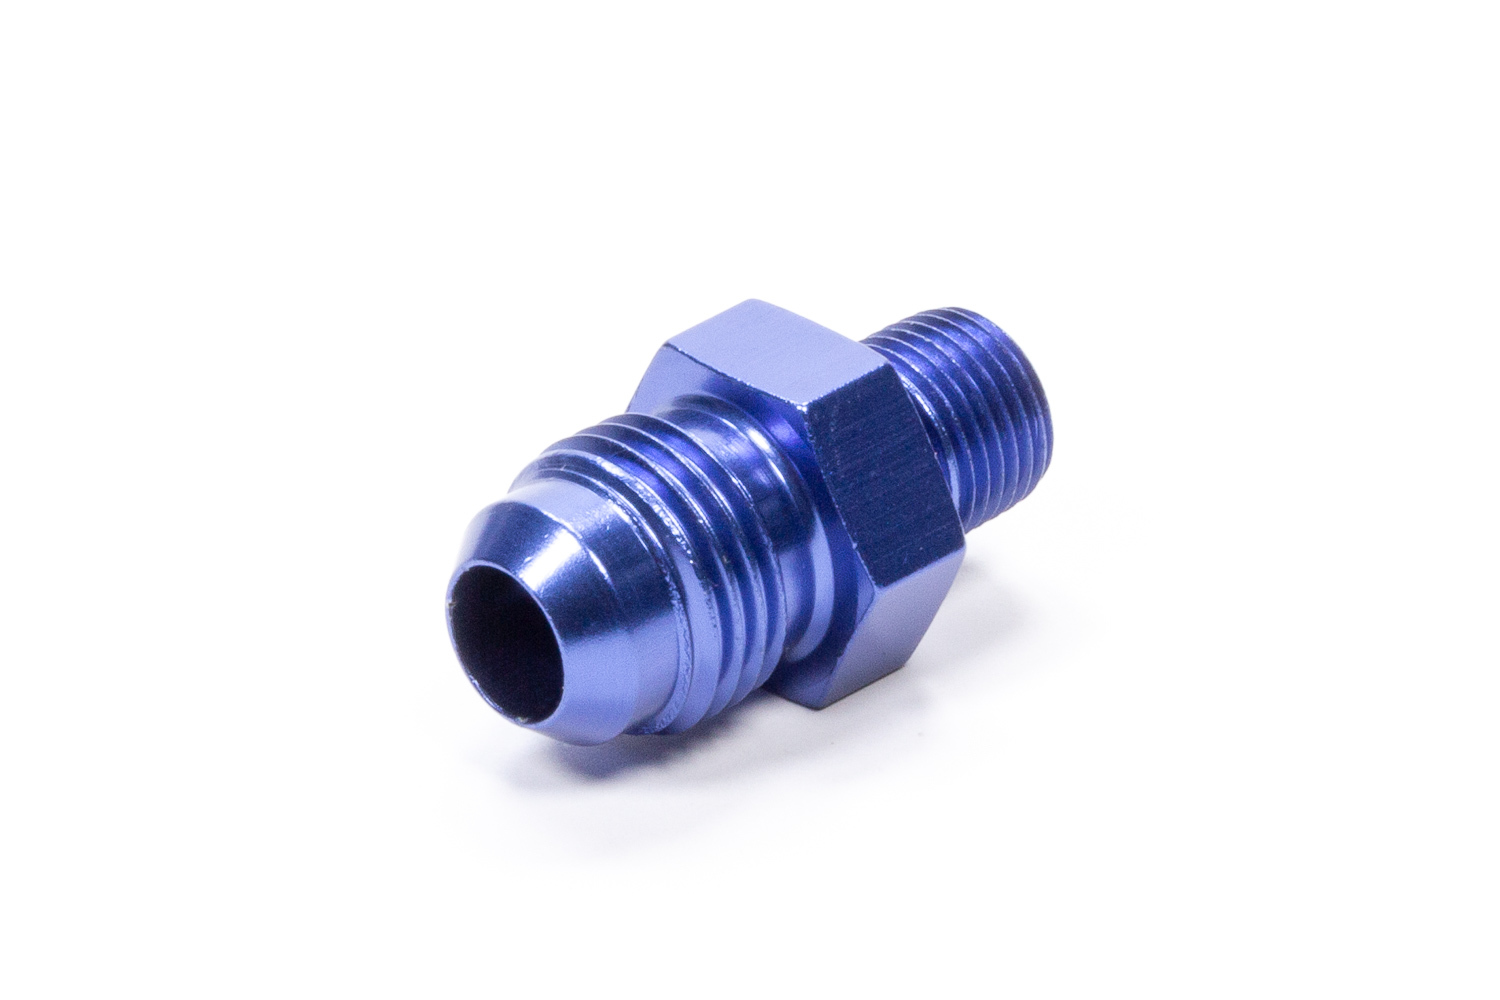 Fragola 481662 - Straight Adapter Fitting #6 x 1/8 MPT